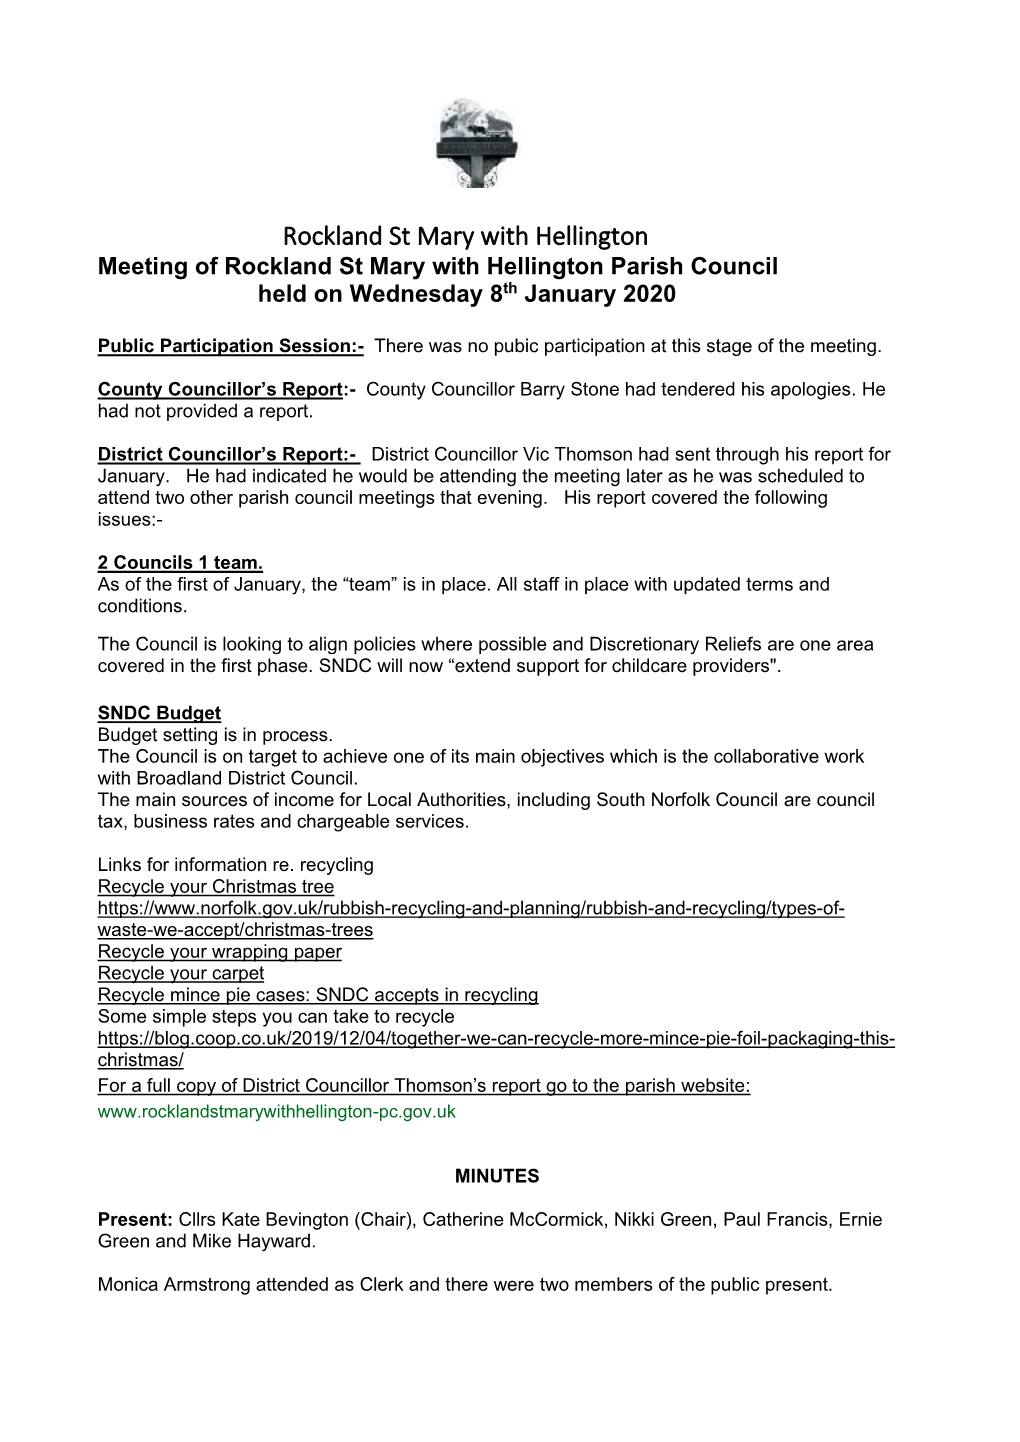 Rockland St Mary with Hellington Parish Council Held on Wednesday 8Th January 2020